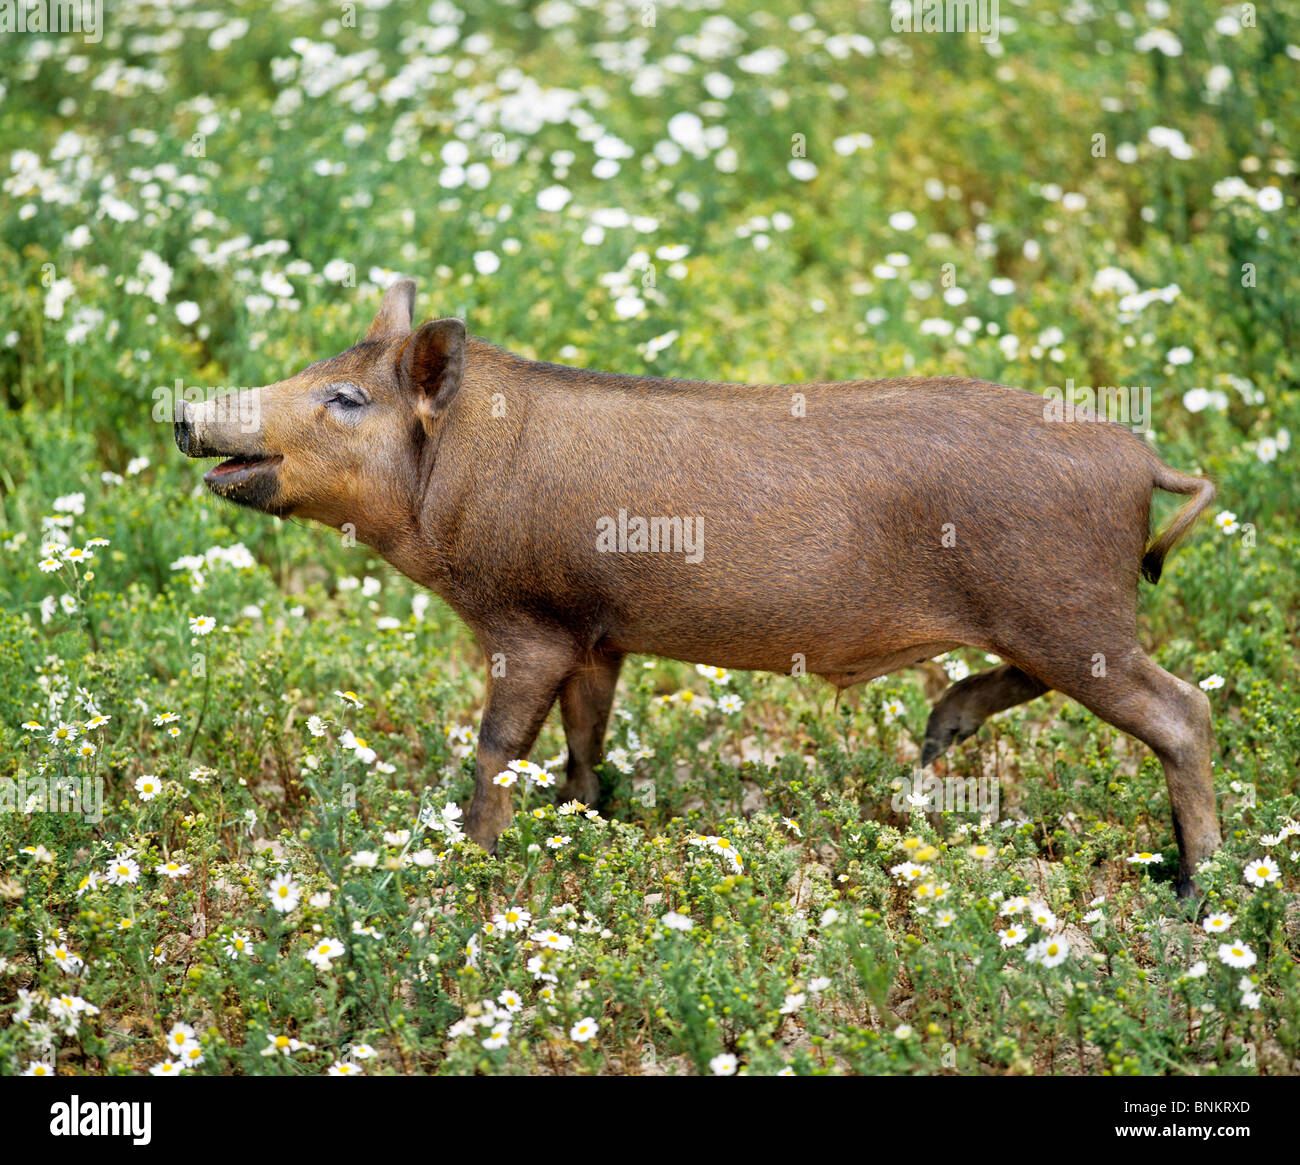 Pig iron age breed piglet walking meadow Stock Photo